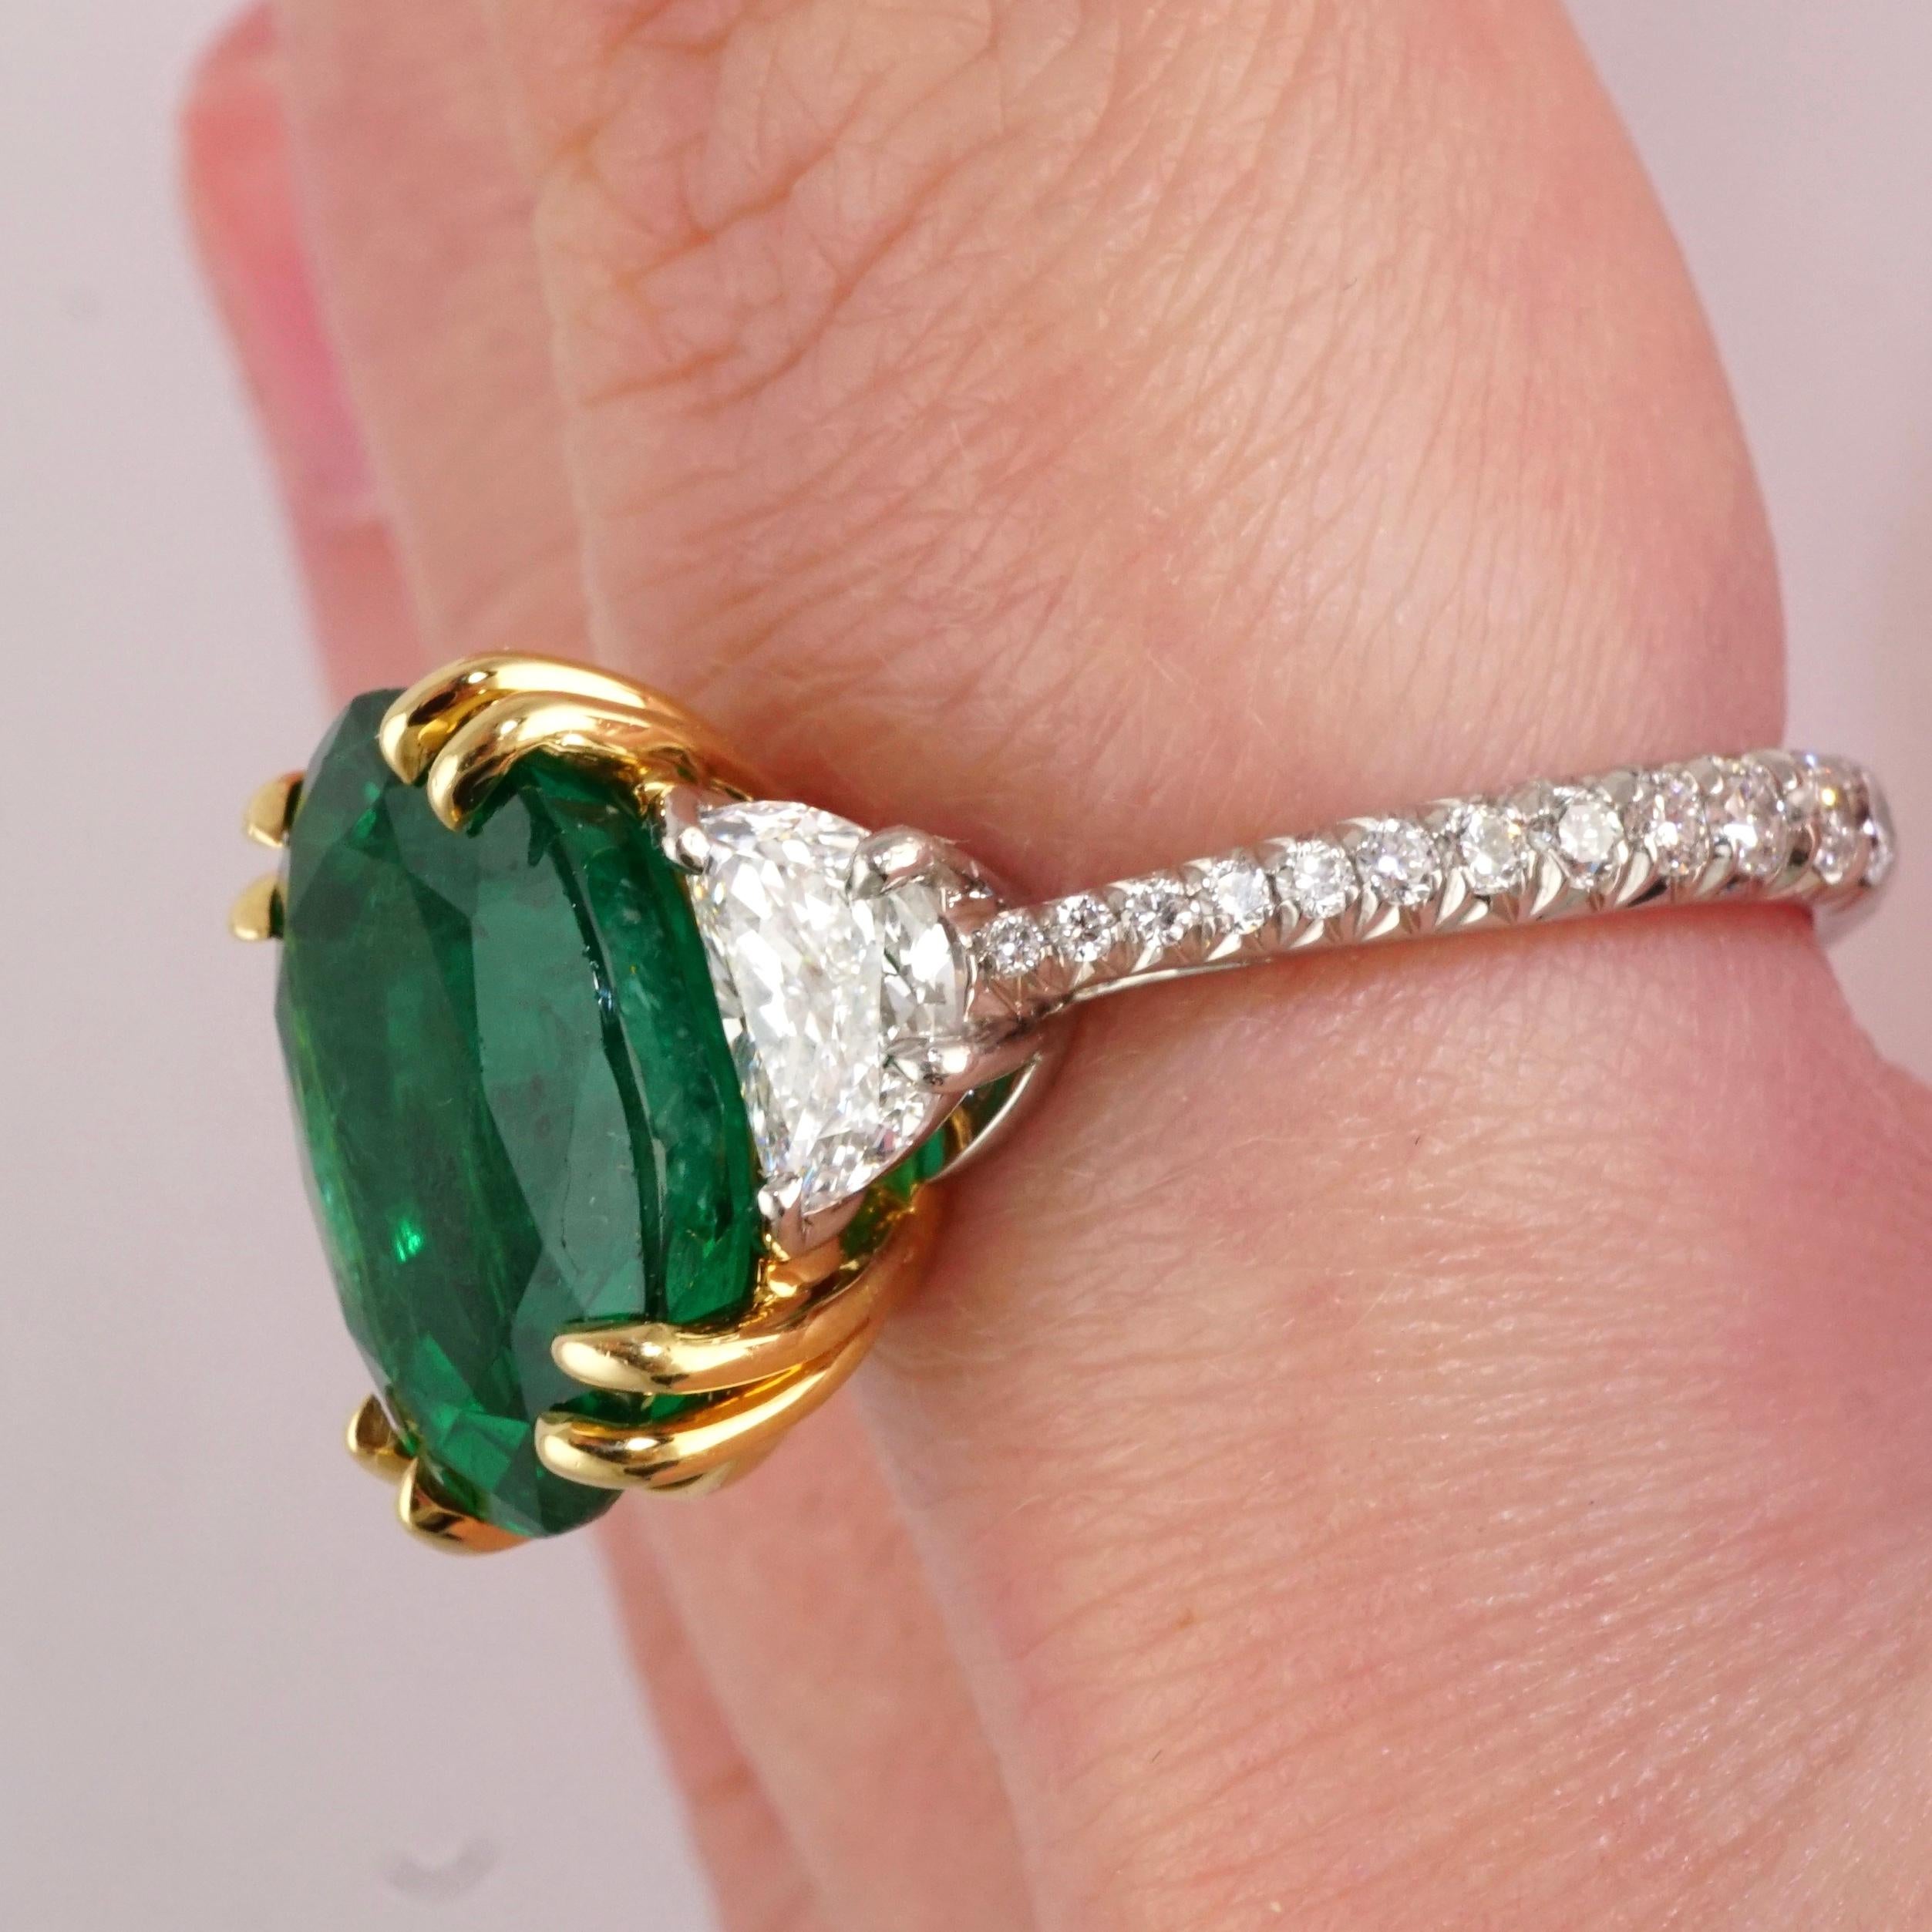 Oval 5.72 Carat Green Emerald Platinum Cocktail/Engagement Ring Set in Platinum In New Condition For Sale In New York, NY